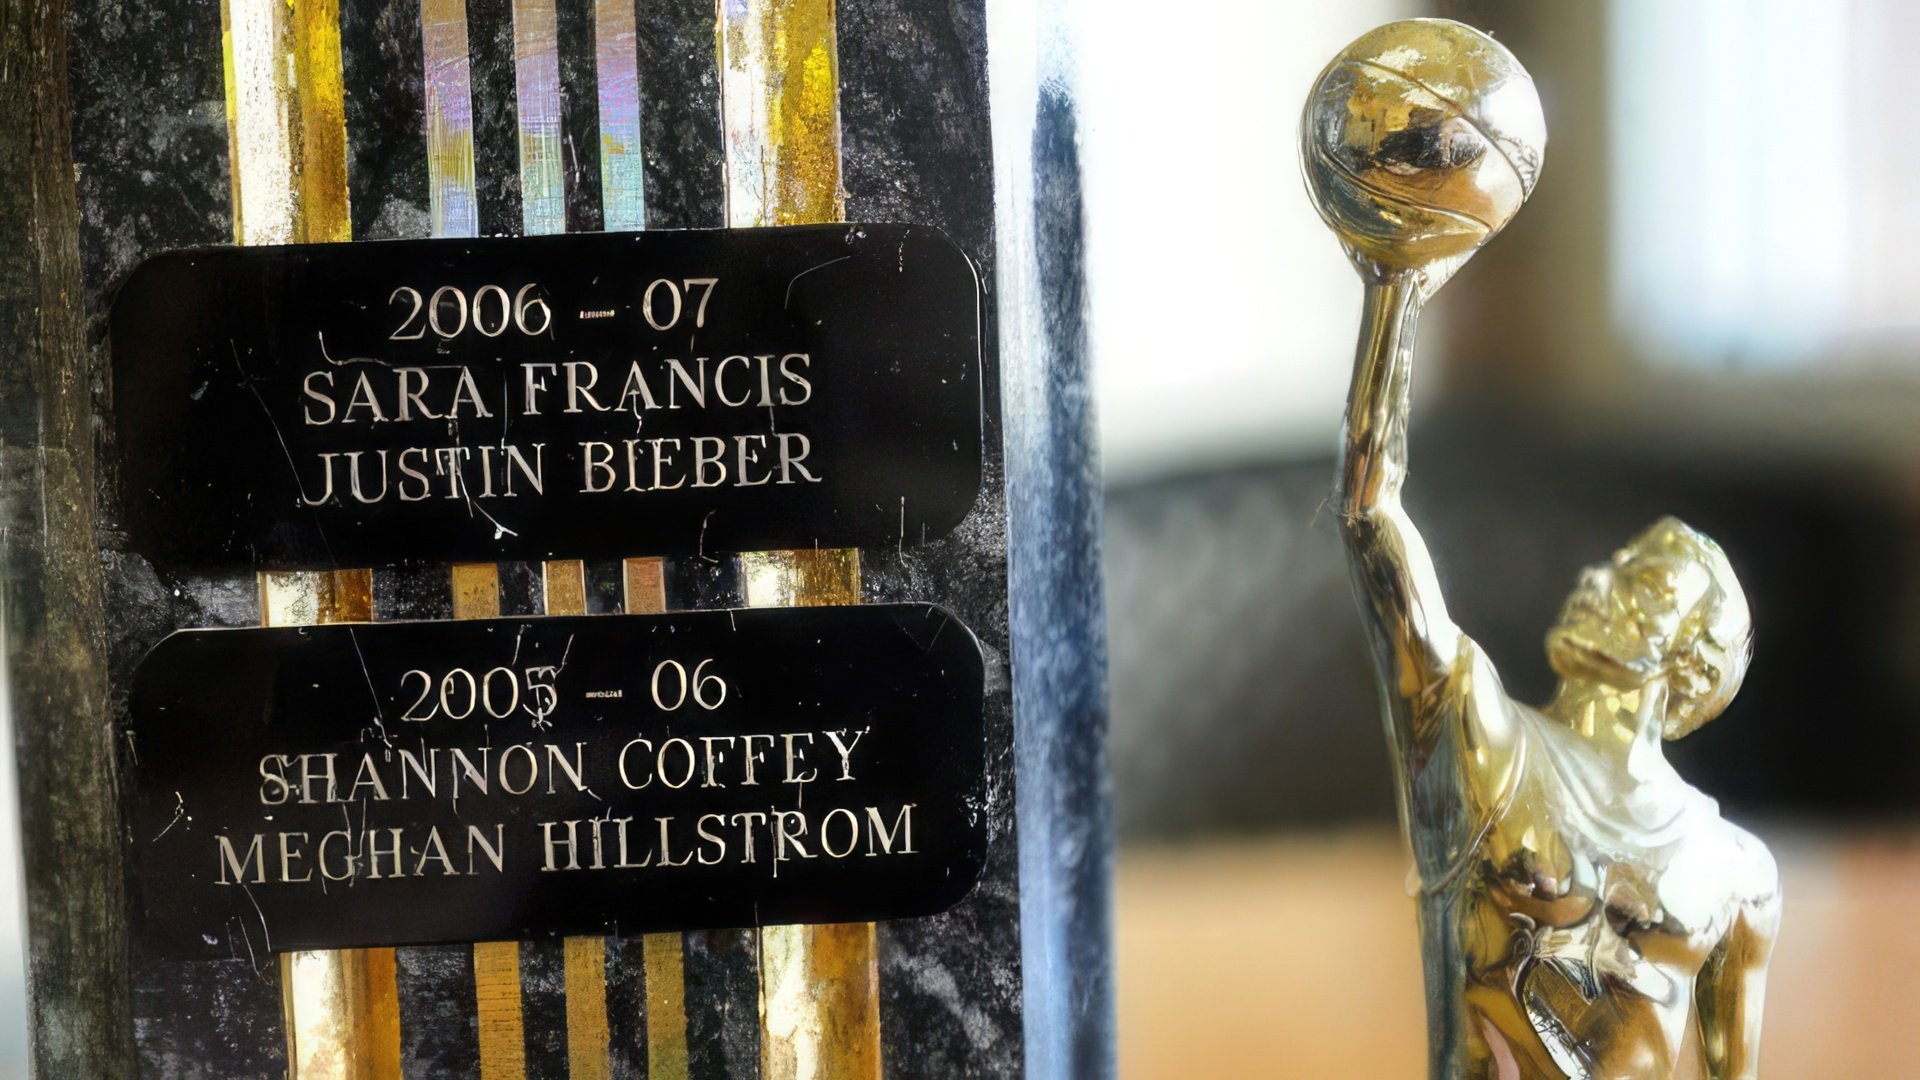 In his childhood, Justin Bieber was passionate about sports and achieved substantial success